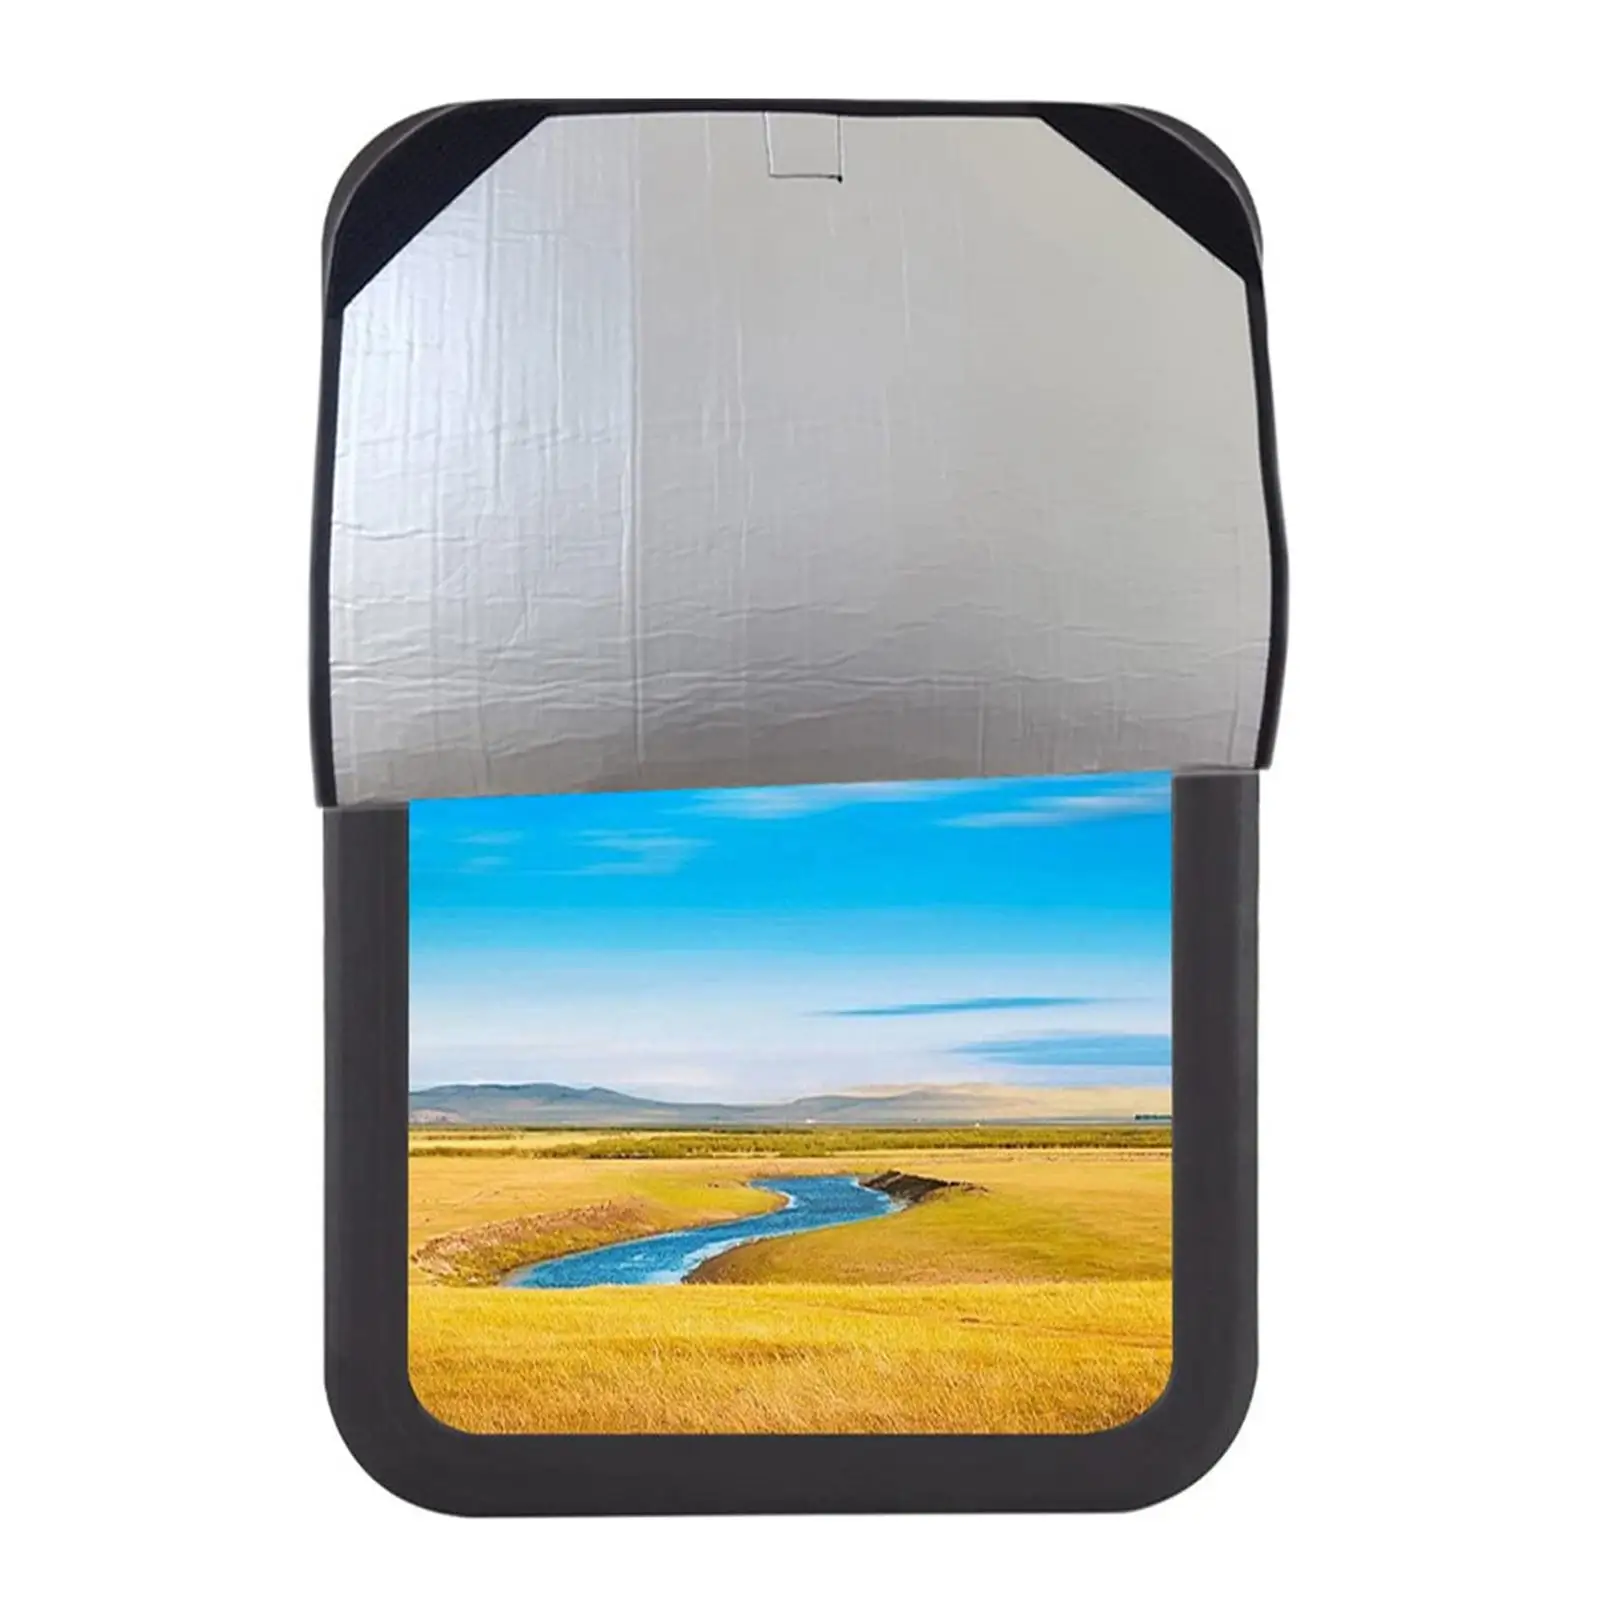 RV Door Window Shade Cover Durable Curtains Interior Blackout Curtains for Camper Privacy Entrance Motorhome Trailer Camper